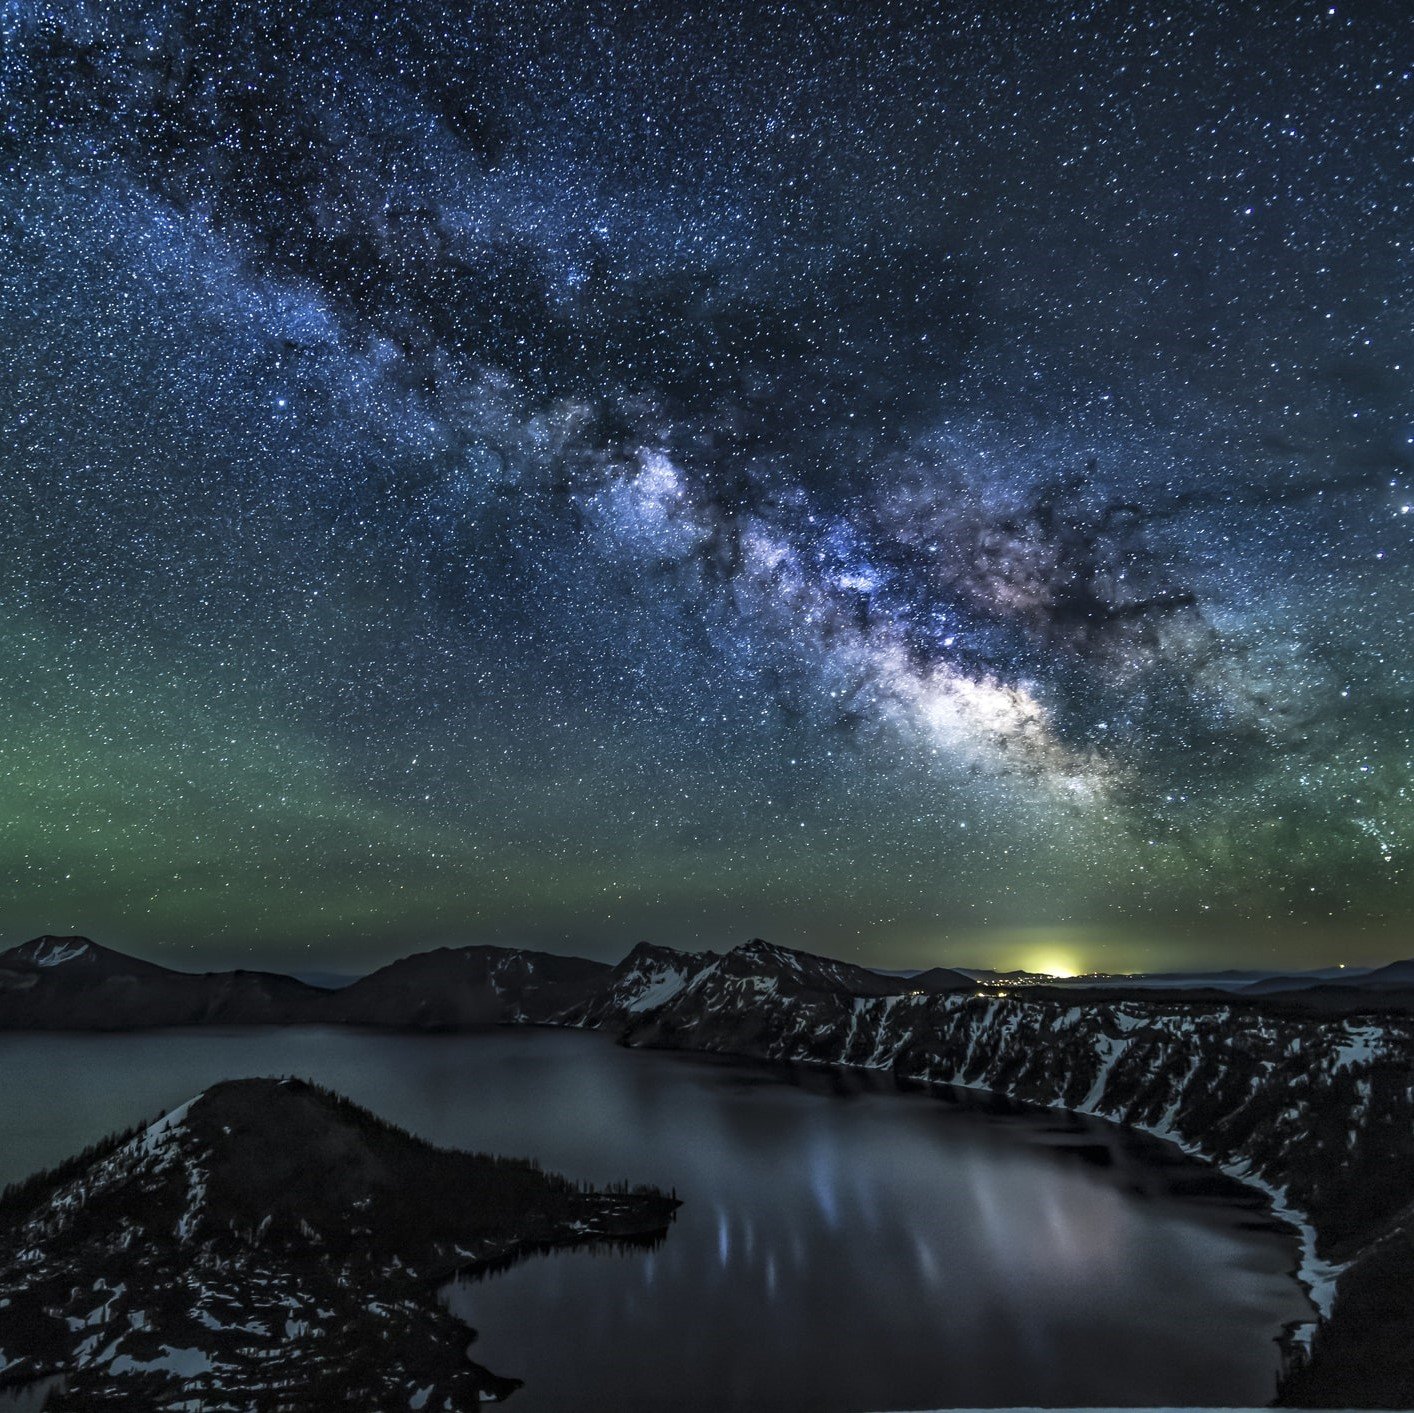 The Milky Way reflecting over Crater Lake in Oregon.